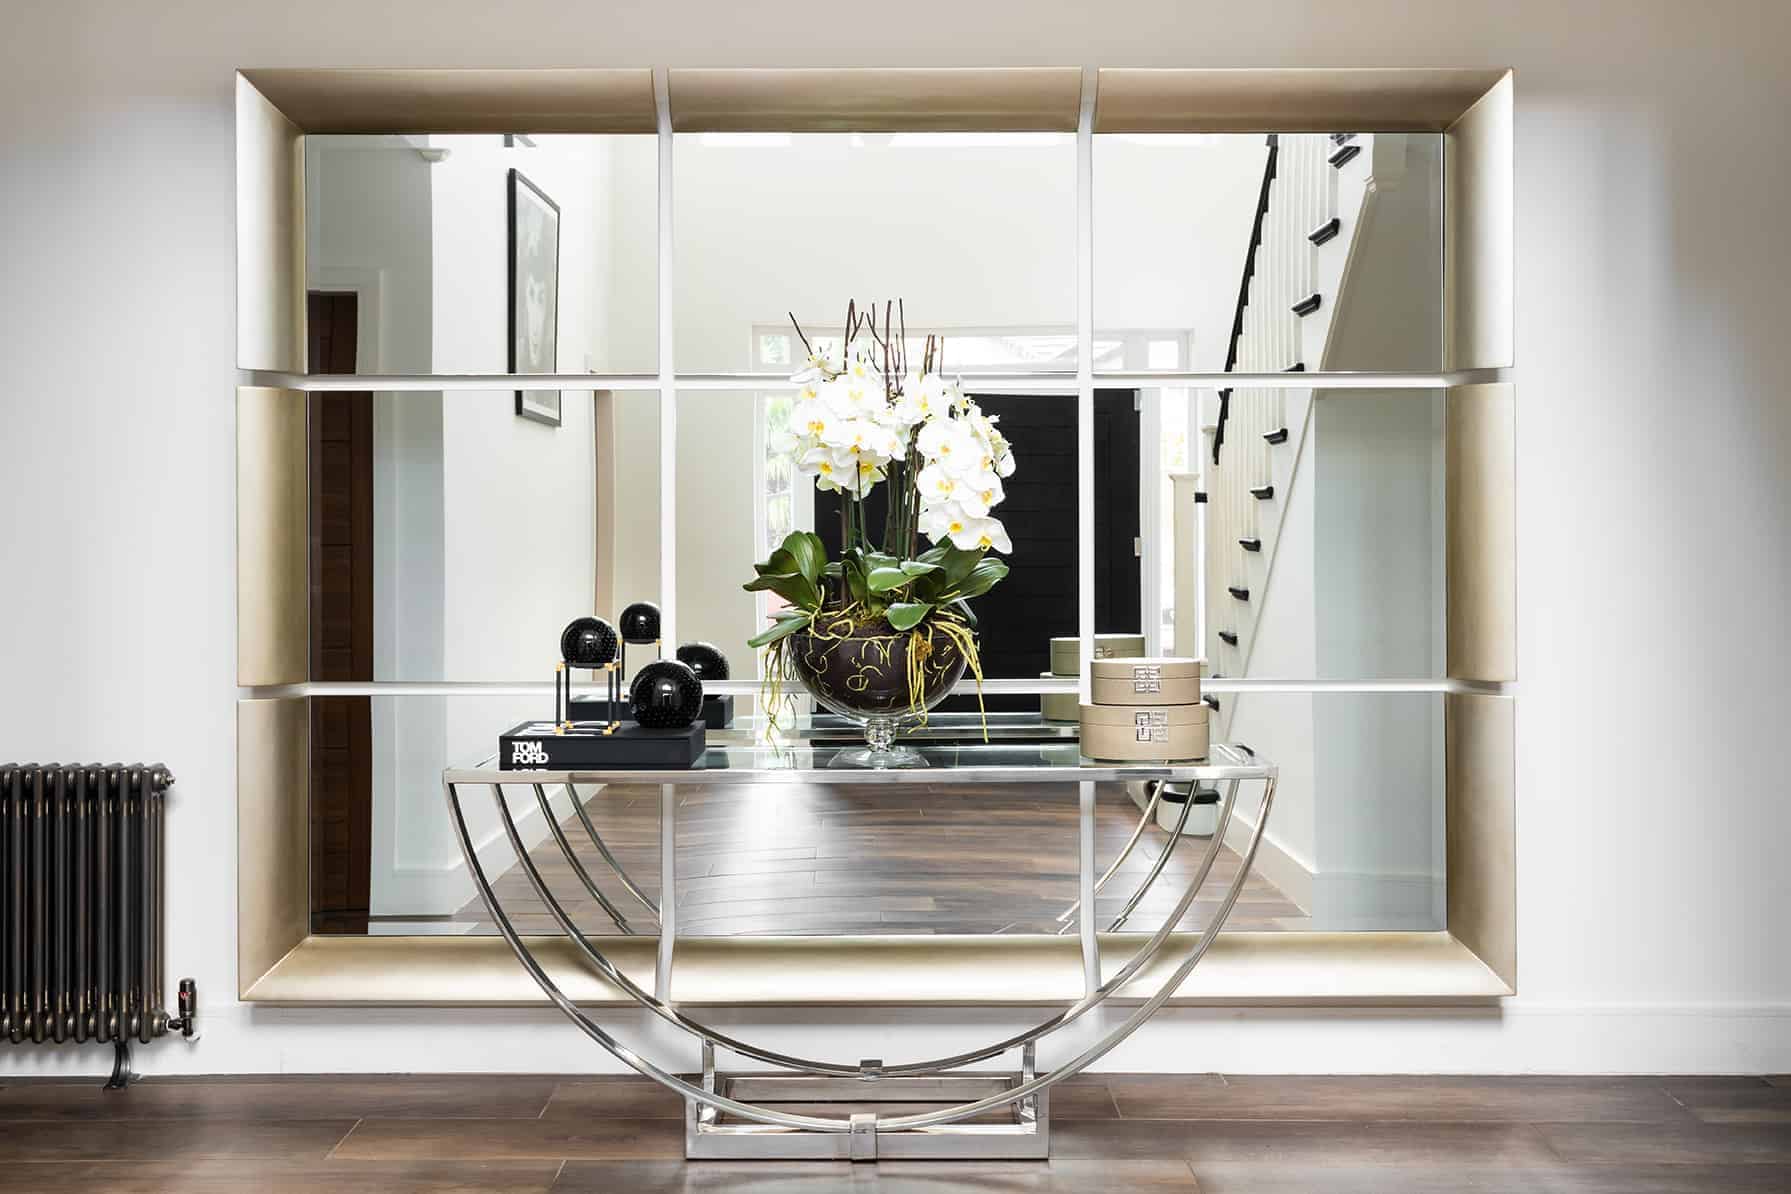 Our Interior Designers in Loughton use this mirror for the grand entrance